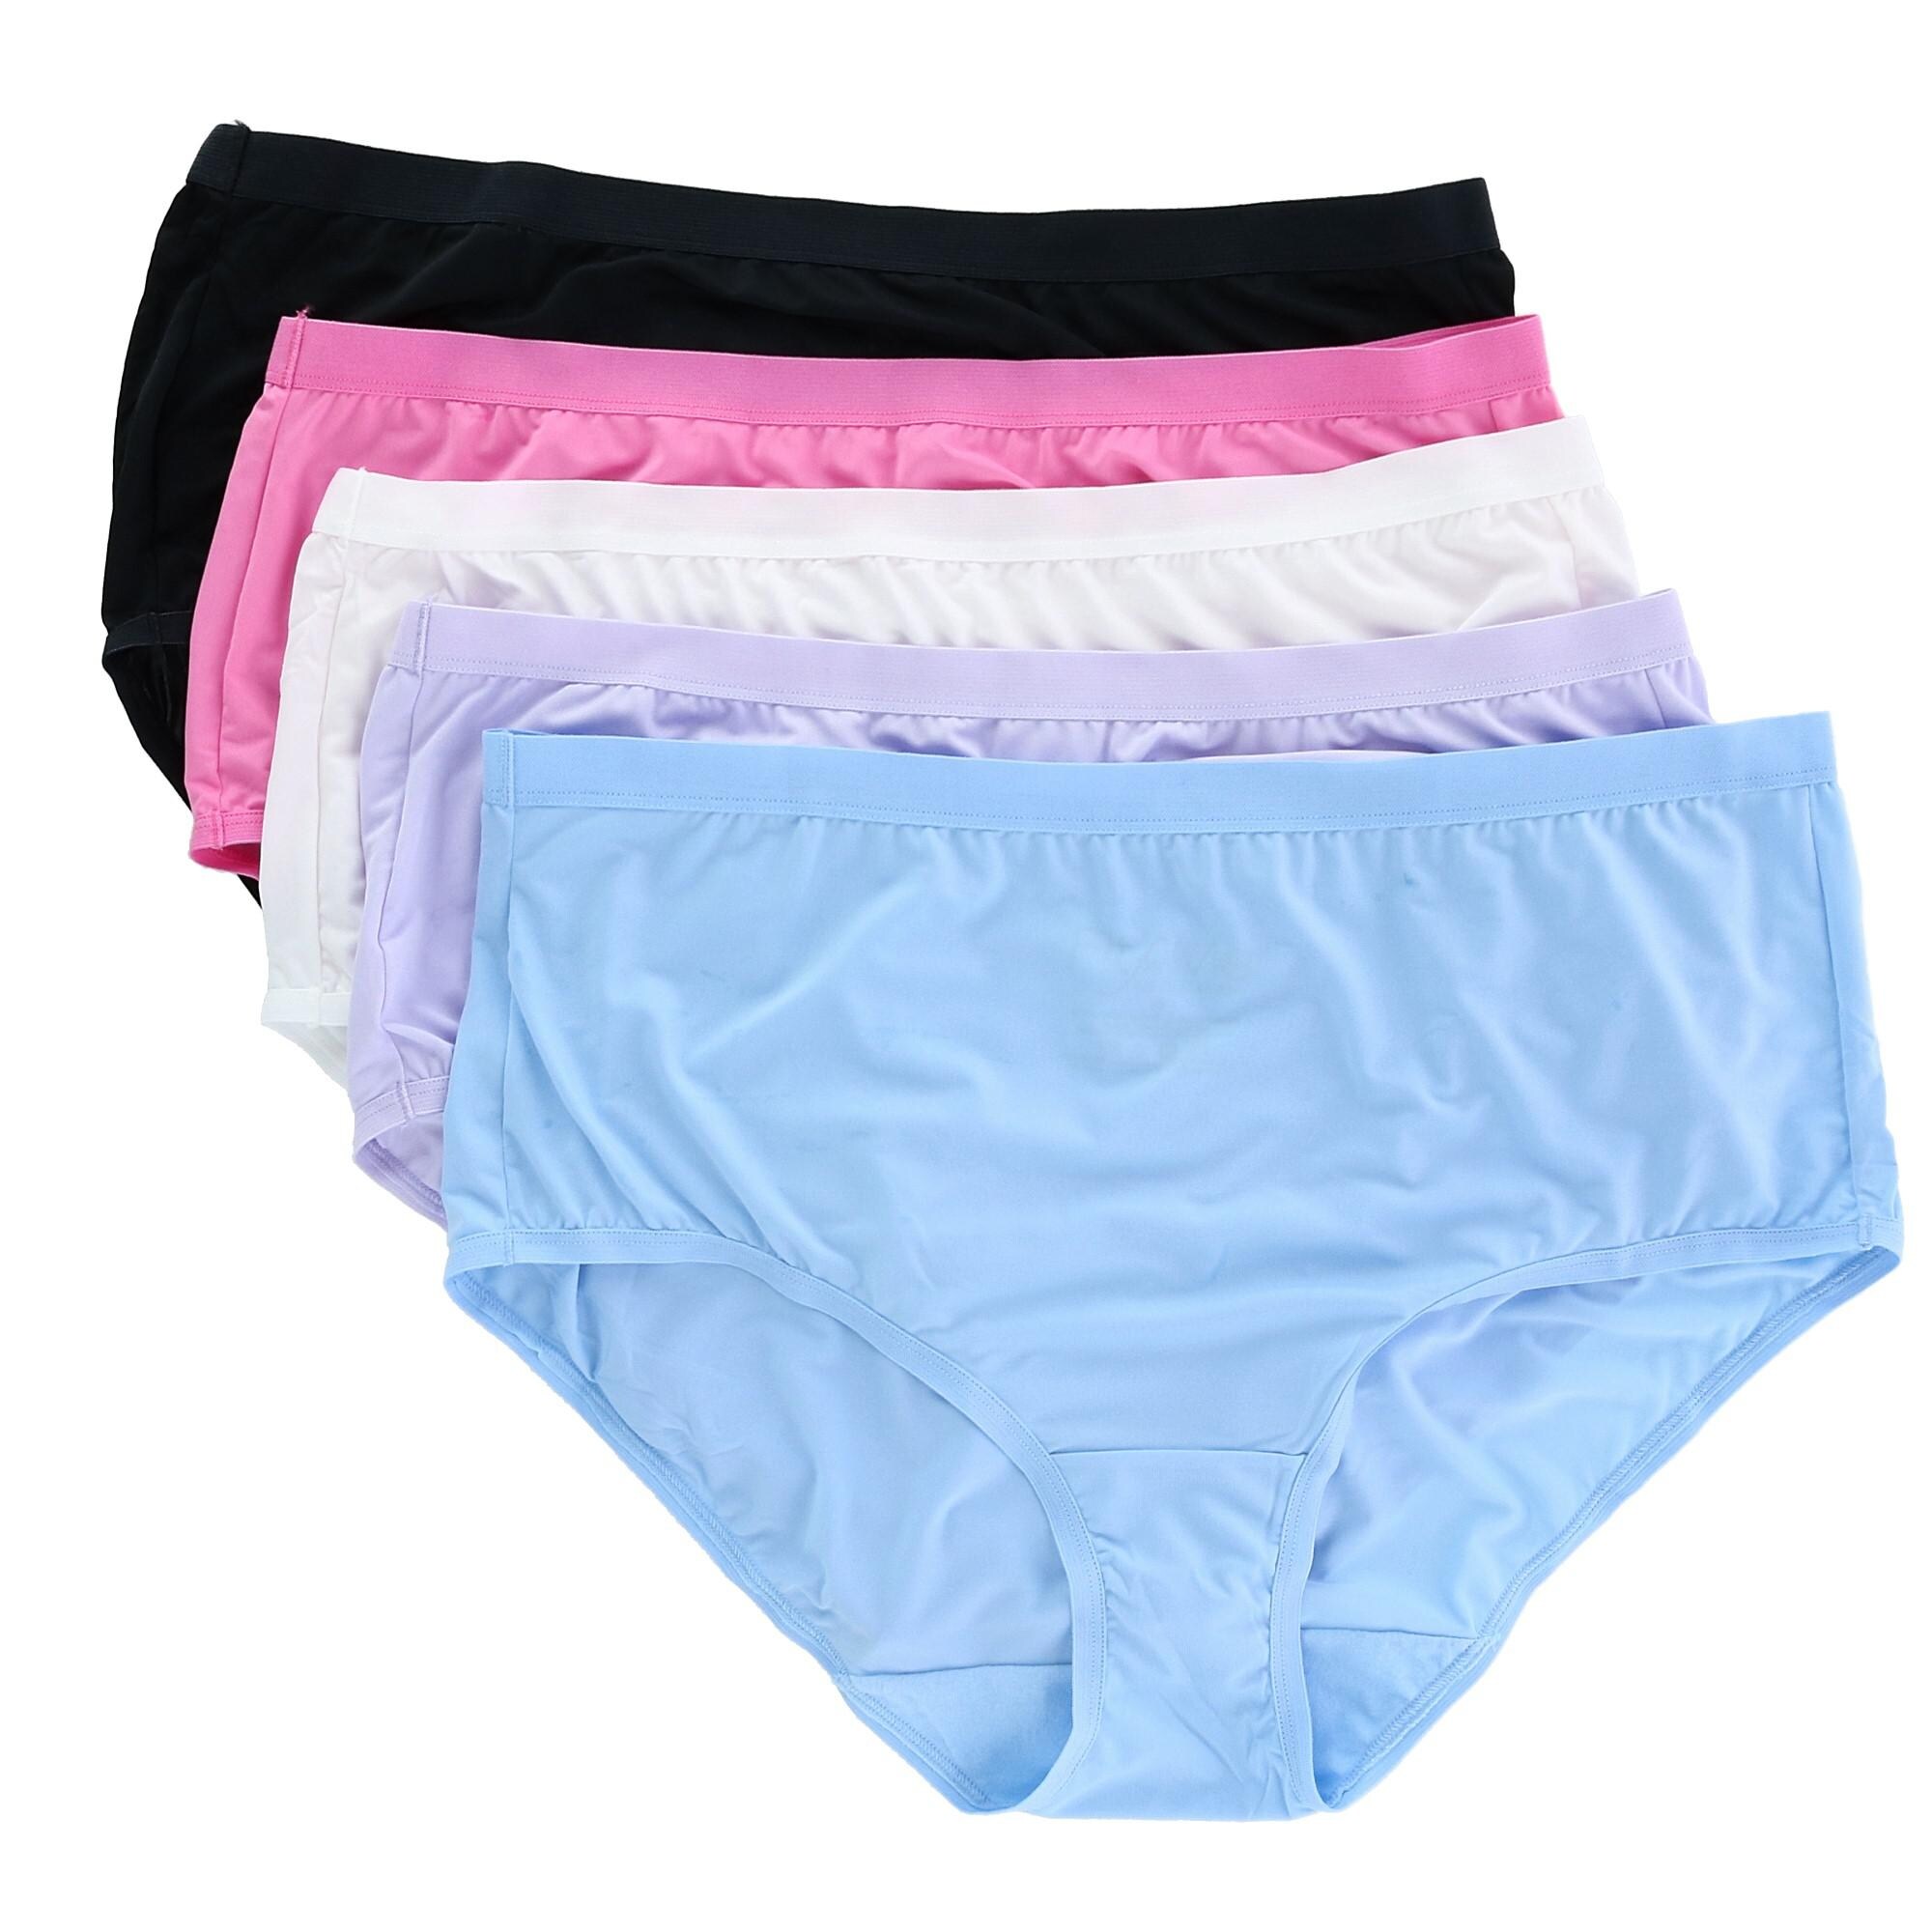 briefs plus size Cheaper Than Retail Price> Buy Clothing, Accessories ...